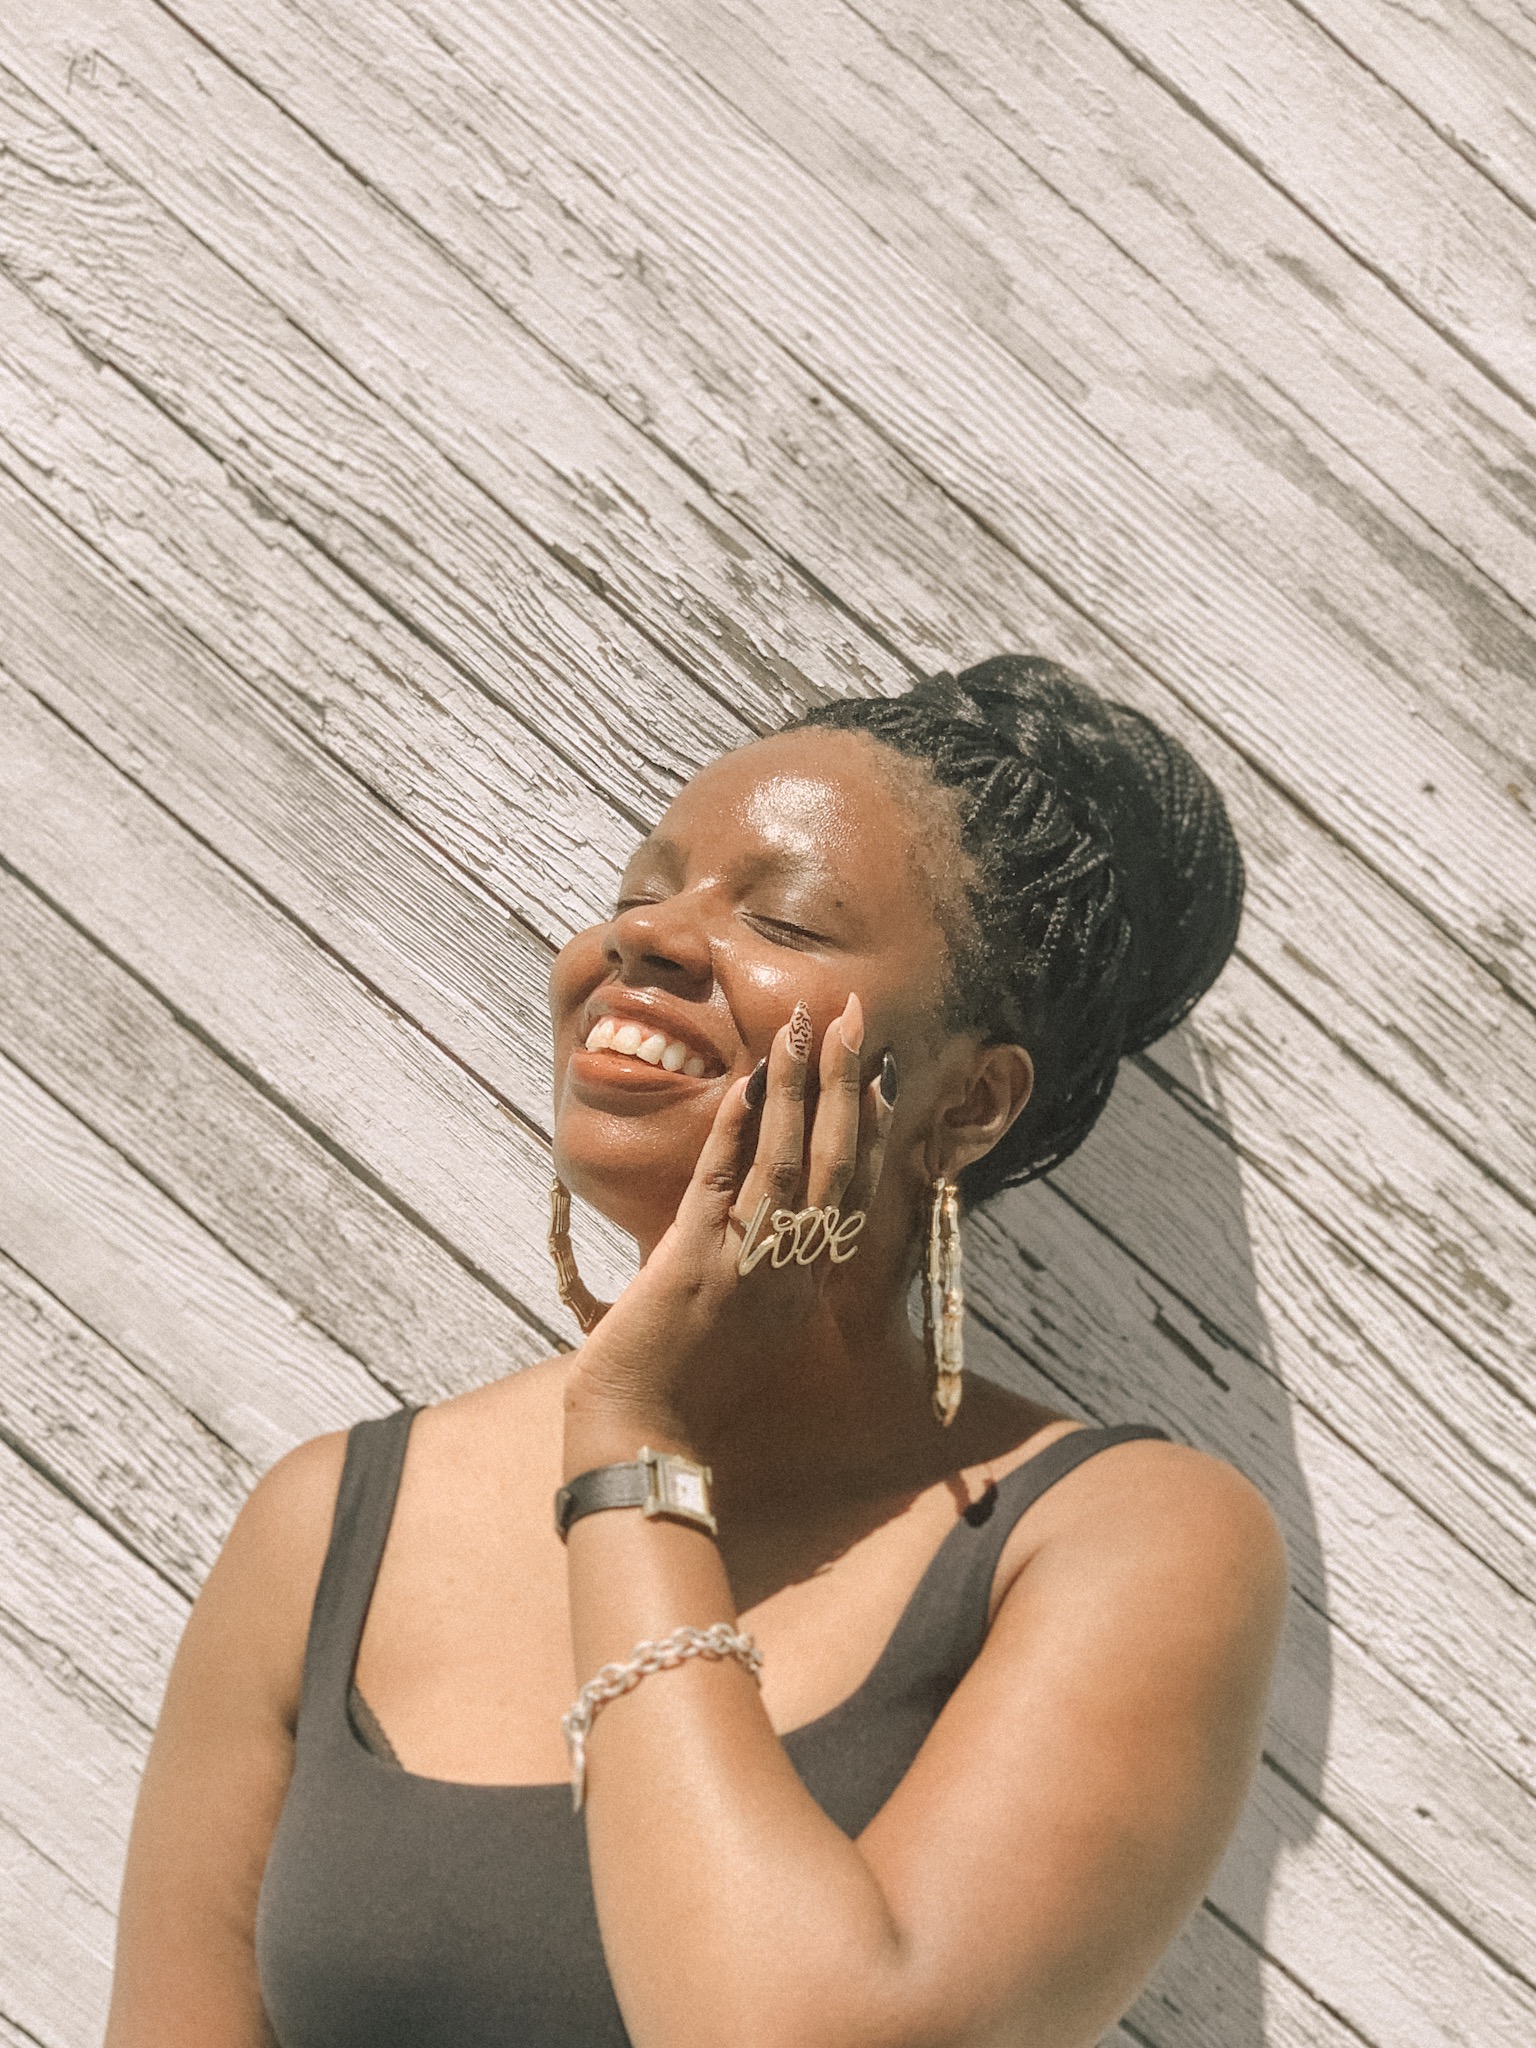 San Francisco Style Blogger Amber Richele Of The Cocoa Butter Diaries Shares Her Struggles With Her Confidence (in Front And Behind The Camera) Since Her Injury